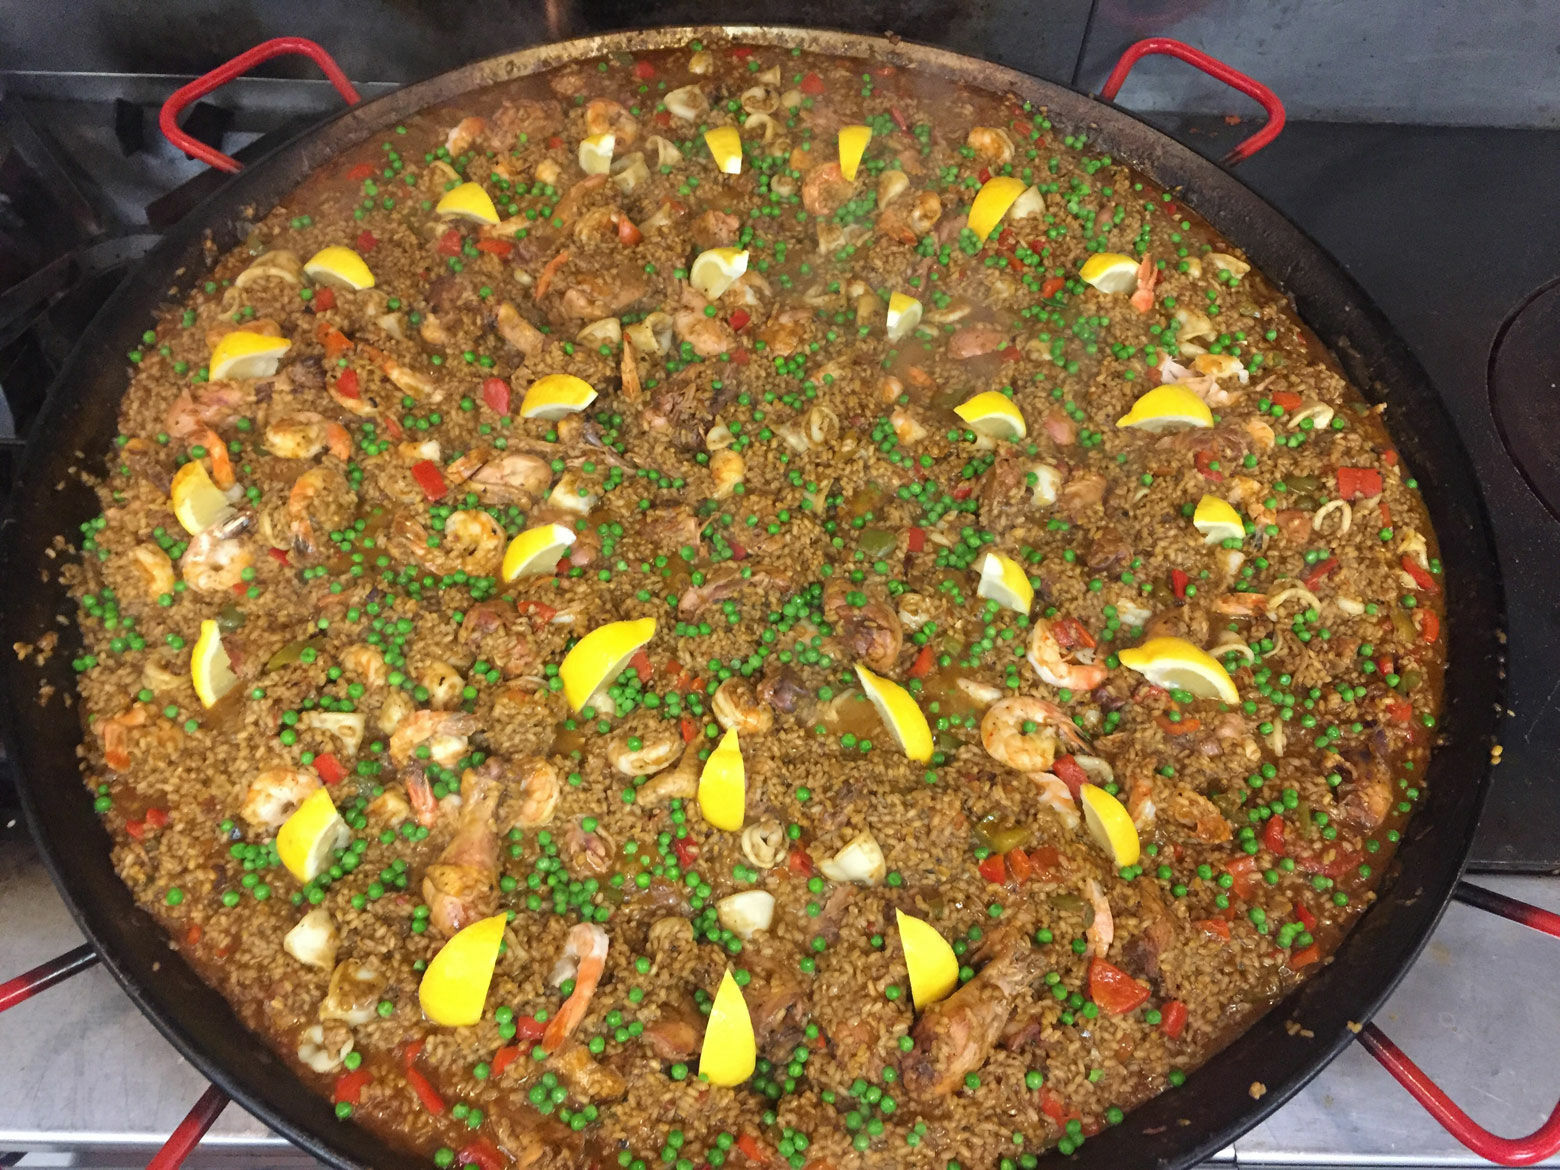 <p>Paella from the Fairmont Hotel in West End is being offered as a special take-out option by chef Jordi Gallardo on April 15. (Courtesy Fairmont Hotel)</p>
